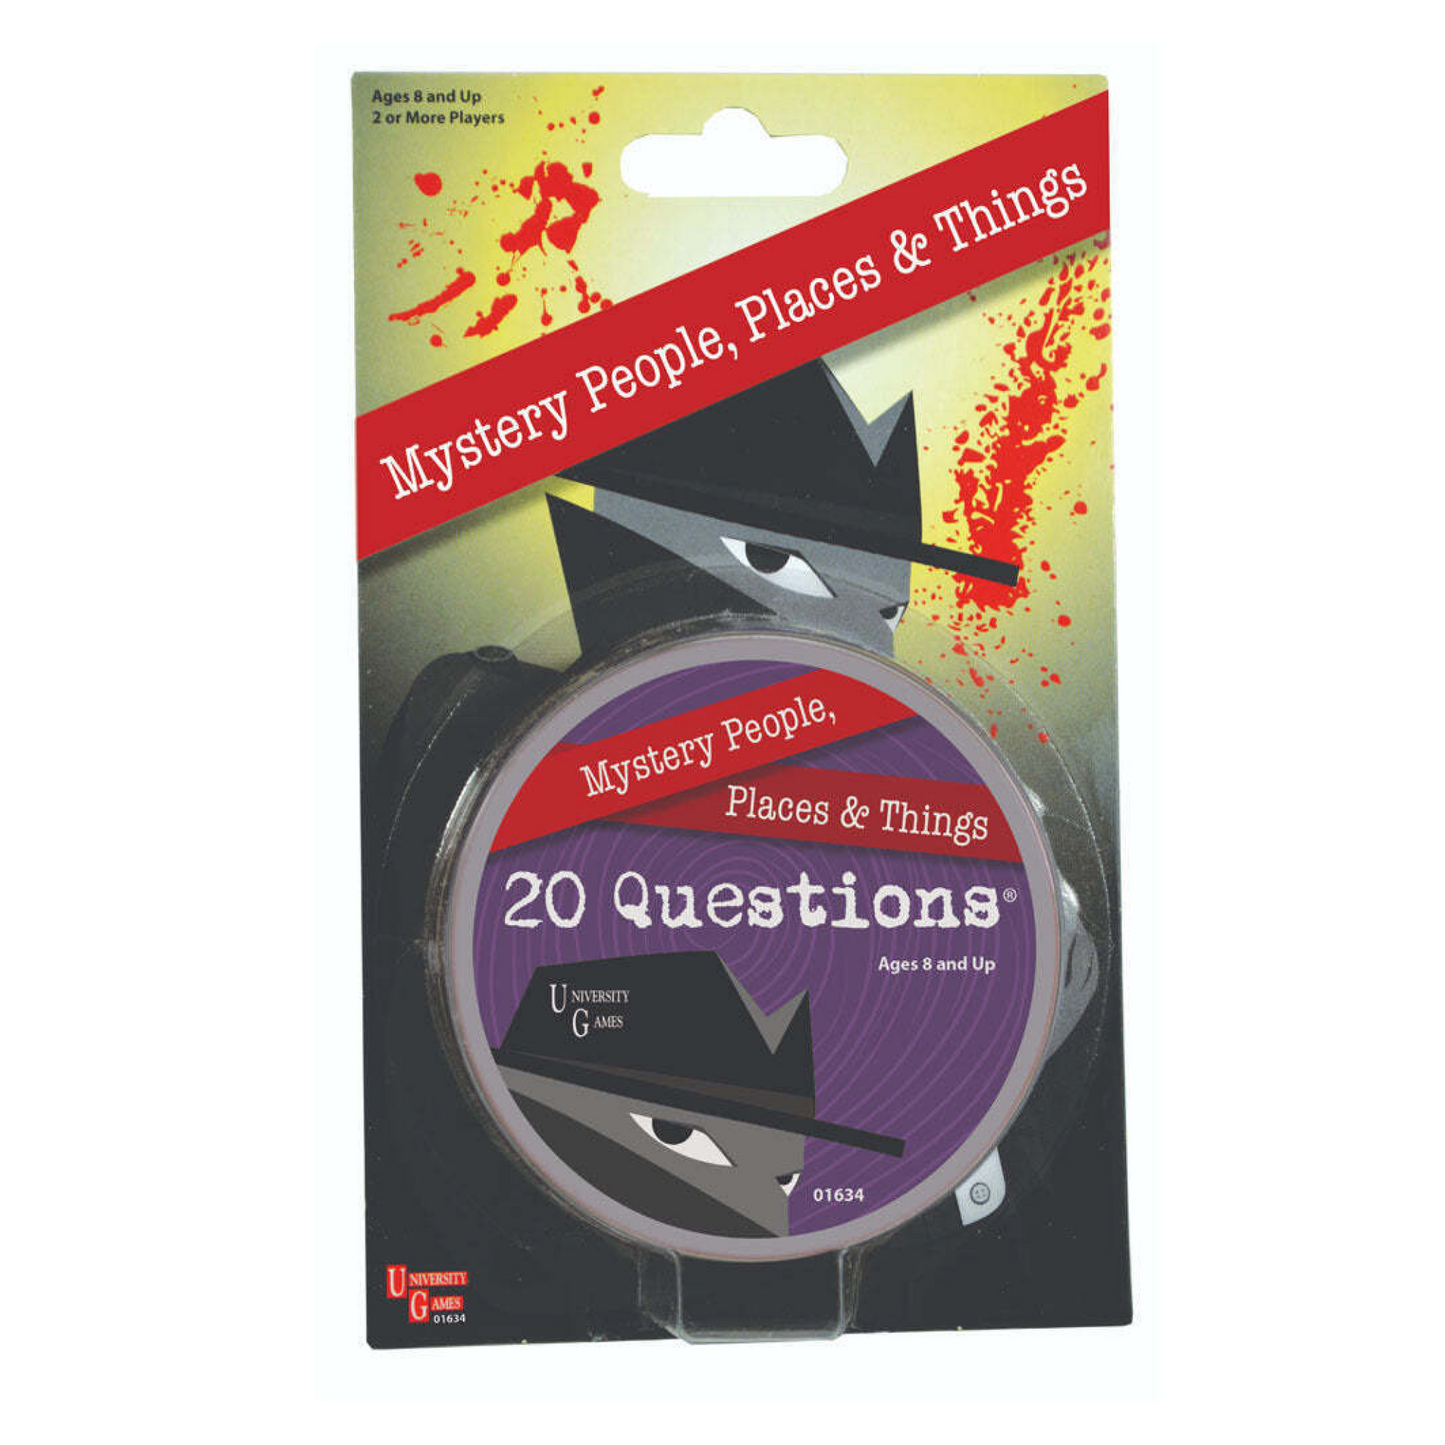 Mystery People, Places & Things 20 Questions